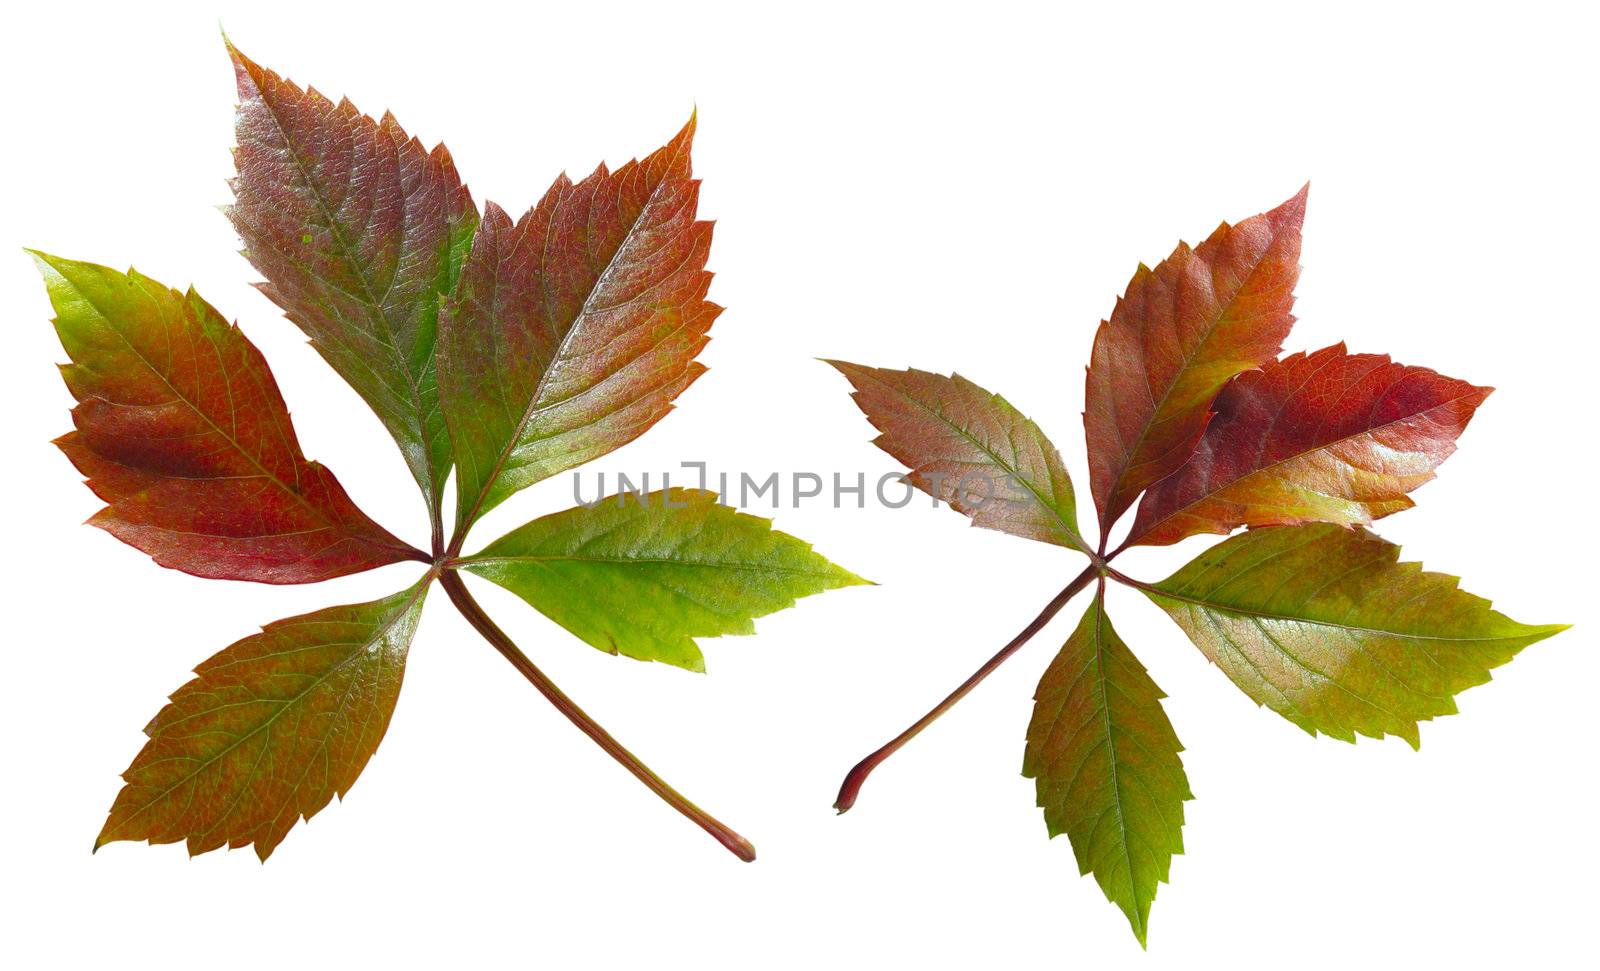 Autumn leaves of a ivy on a white background. Images contain clipping puths.